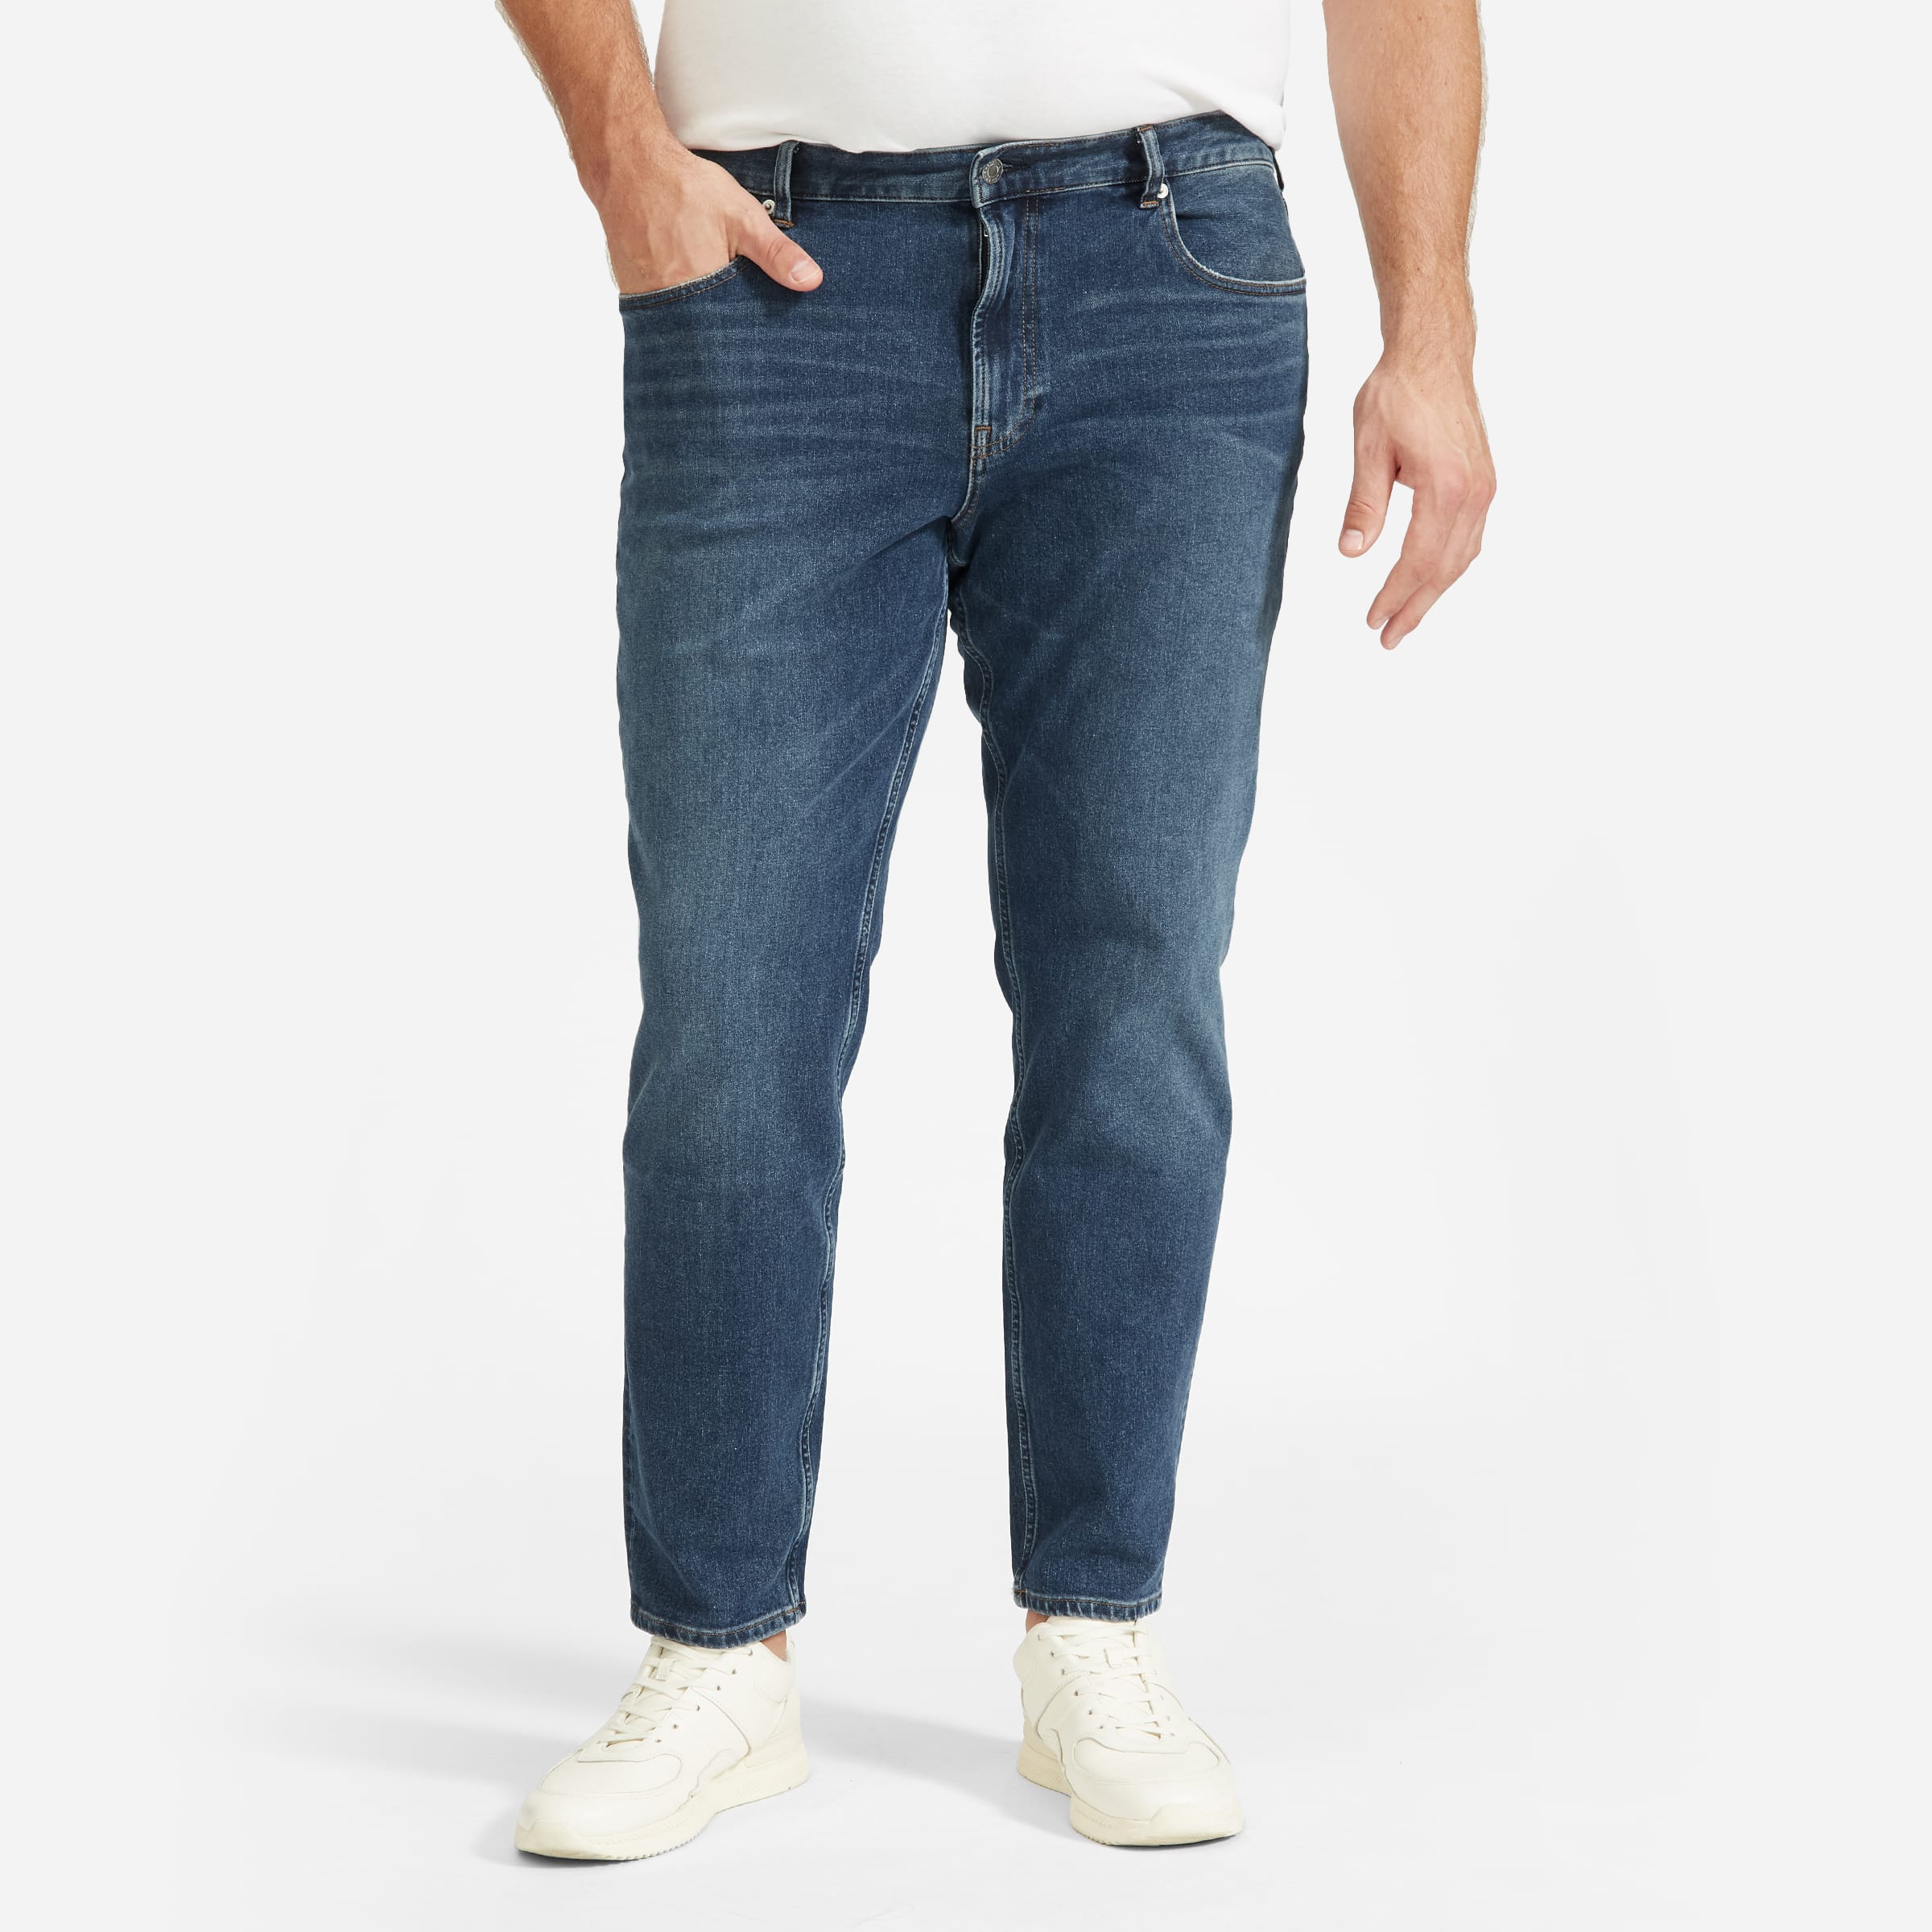 jeans for short stocky man